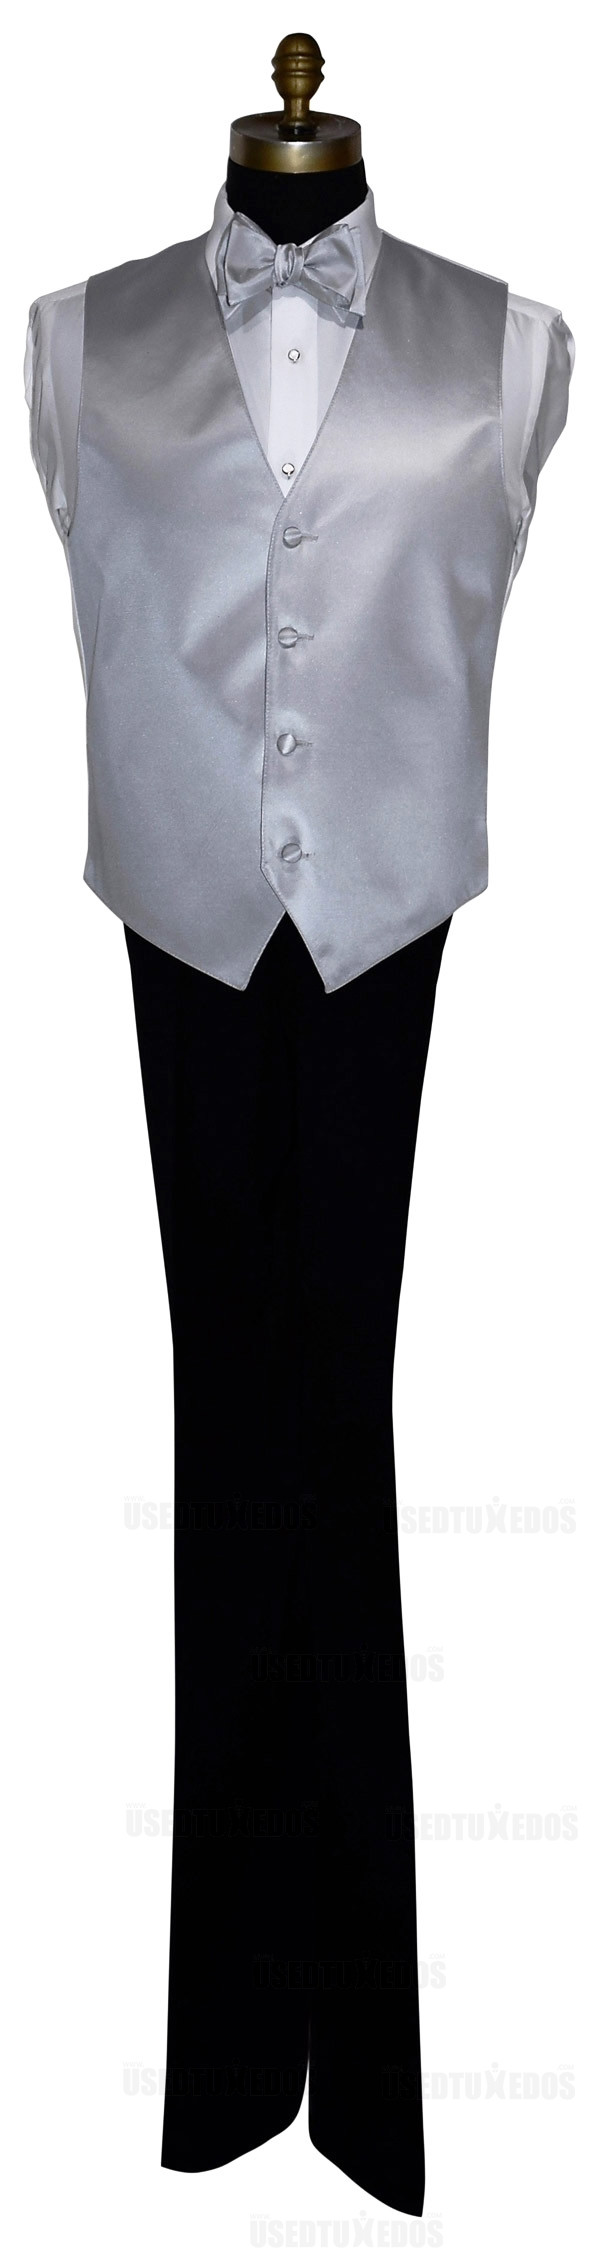 silver vest and bowtie on tuxbling.com for tuxedos